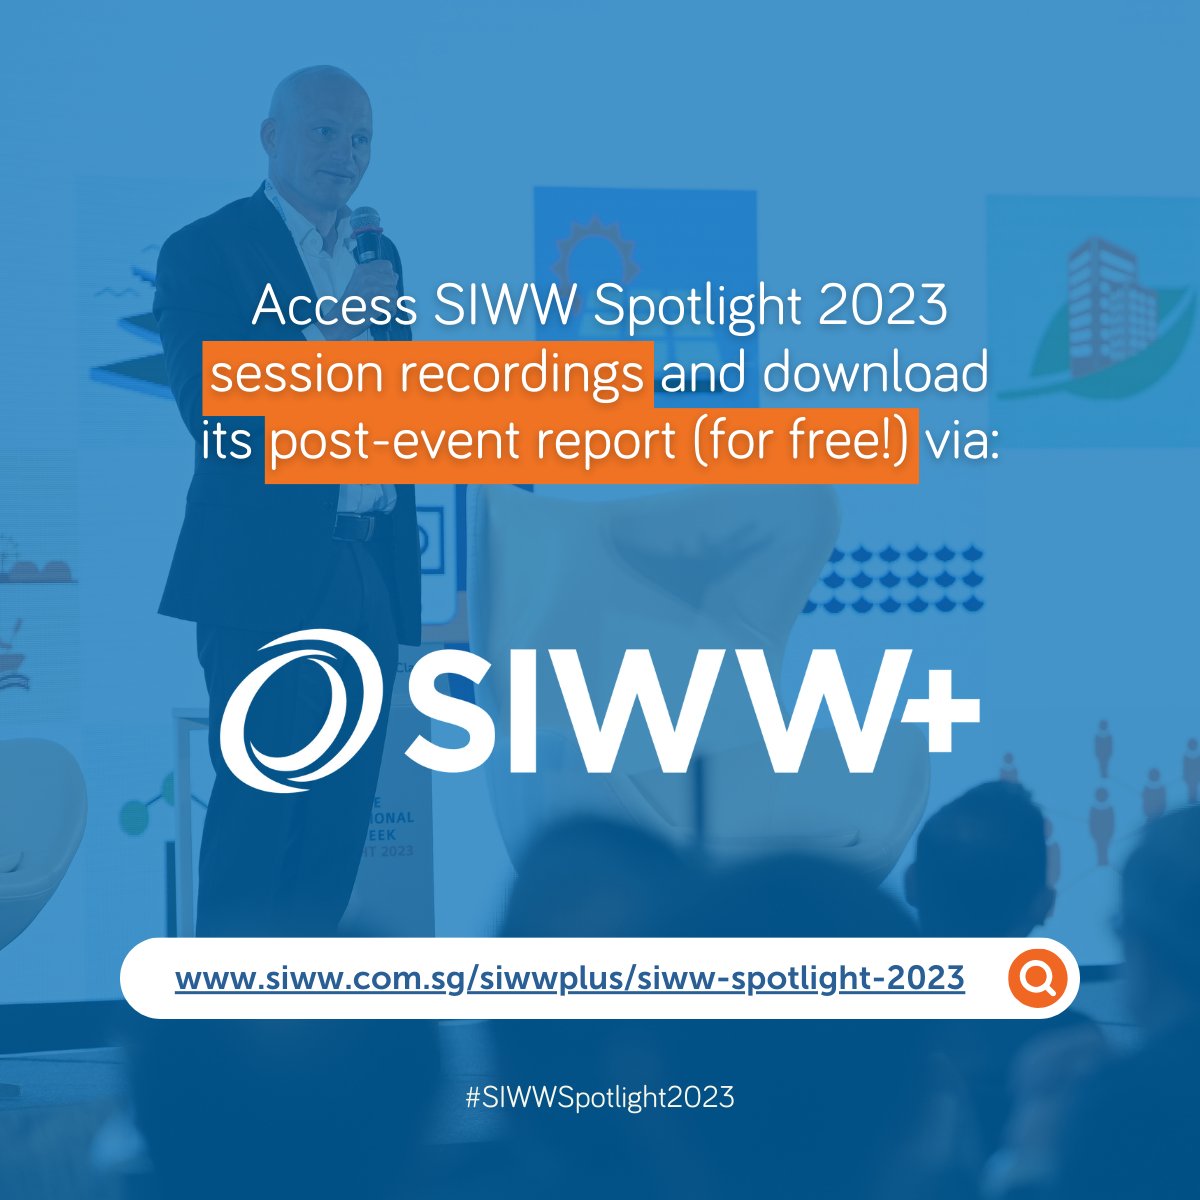 How did @GlobalOmnium digitally transform processes and infrastructures to improve efficiencies & achieve impressive costs & energy savings to serve 400+ cities in Spain? Find answers in @IdricaHQ & @Xylem's sharing at #SIWWSpotlight2023 post-event report >bit.ly/3PNbZkL